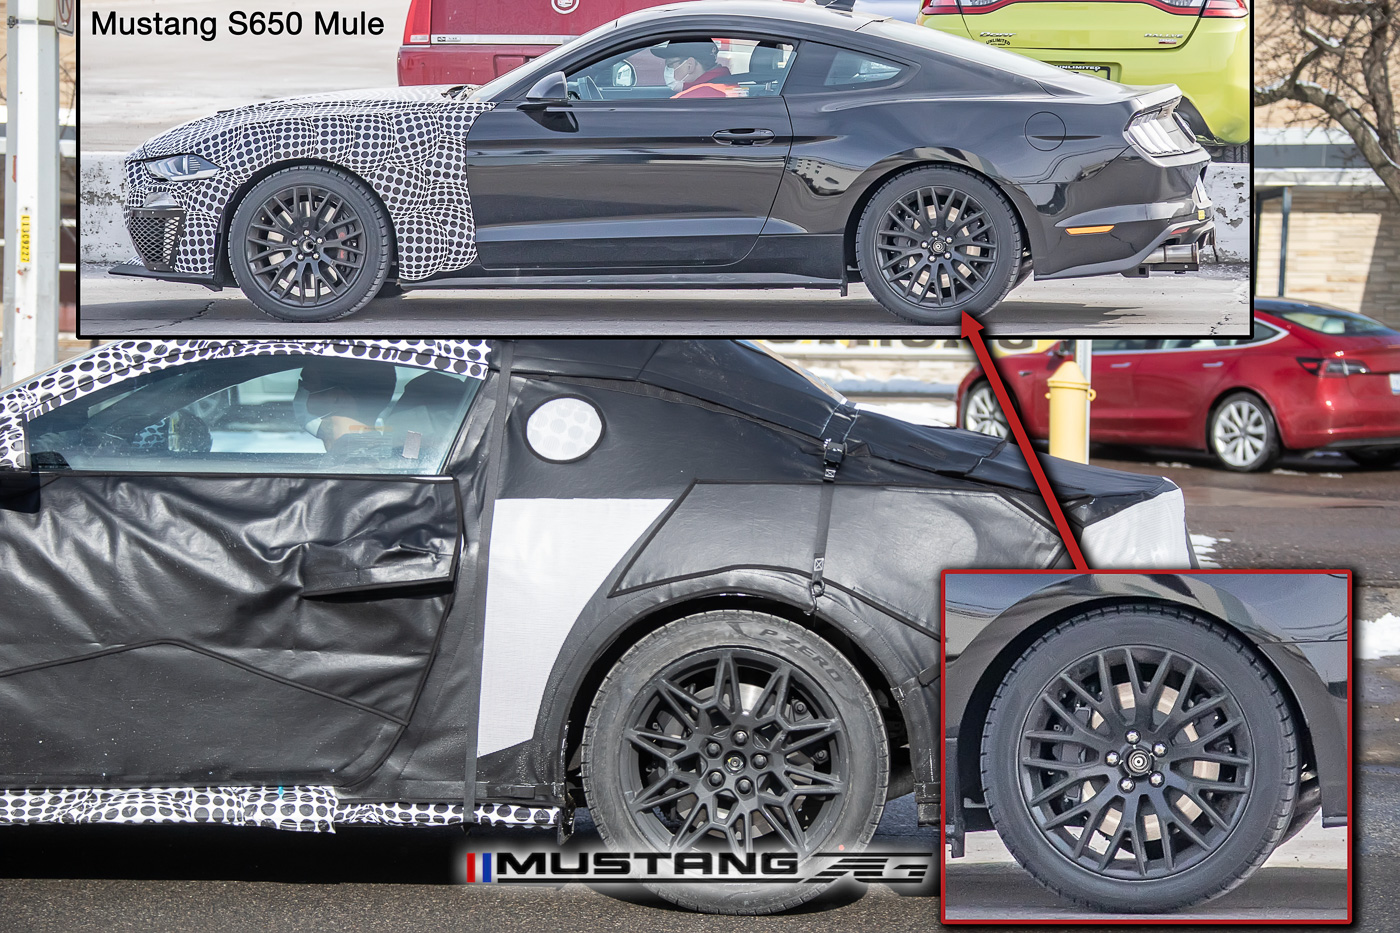 S650 Mustang Spied: New Mustang Prototype w/ Mach 1-Style Wheels, Upgraded Dual Caliper Rear Brakes 📸 S650 mule